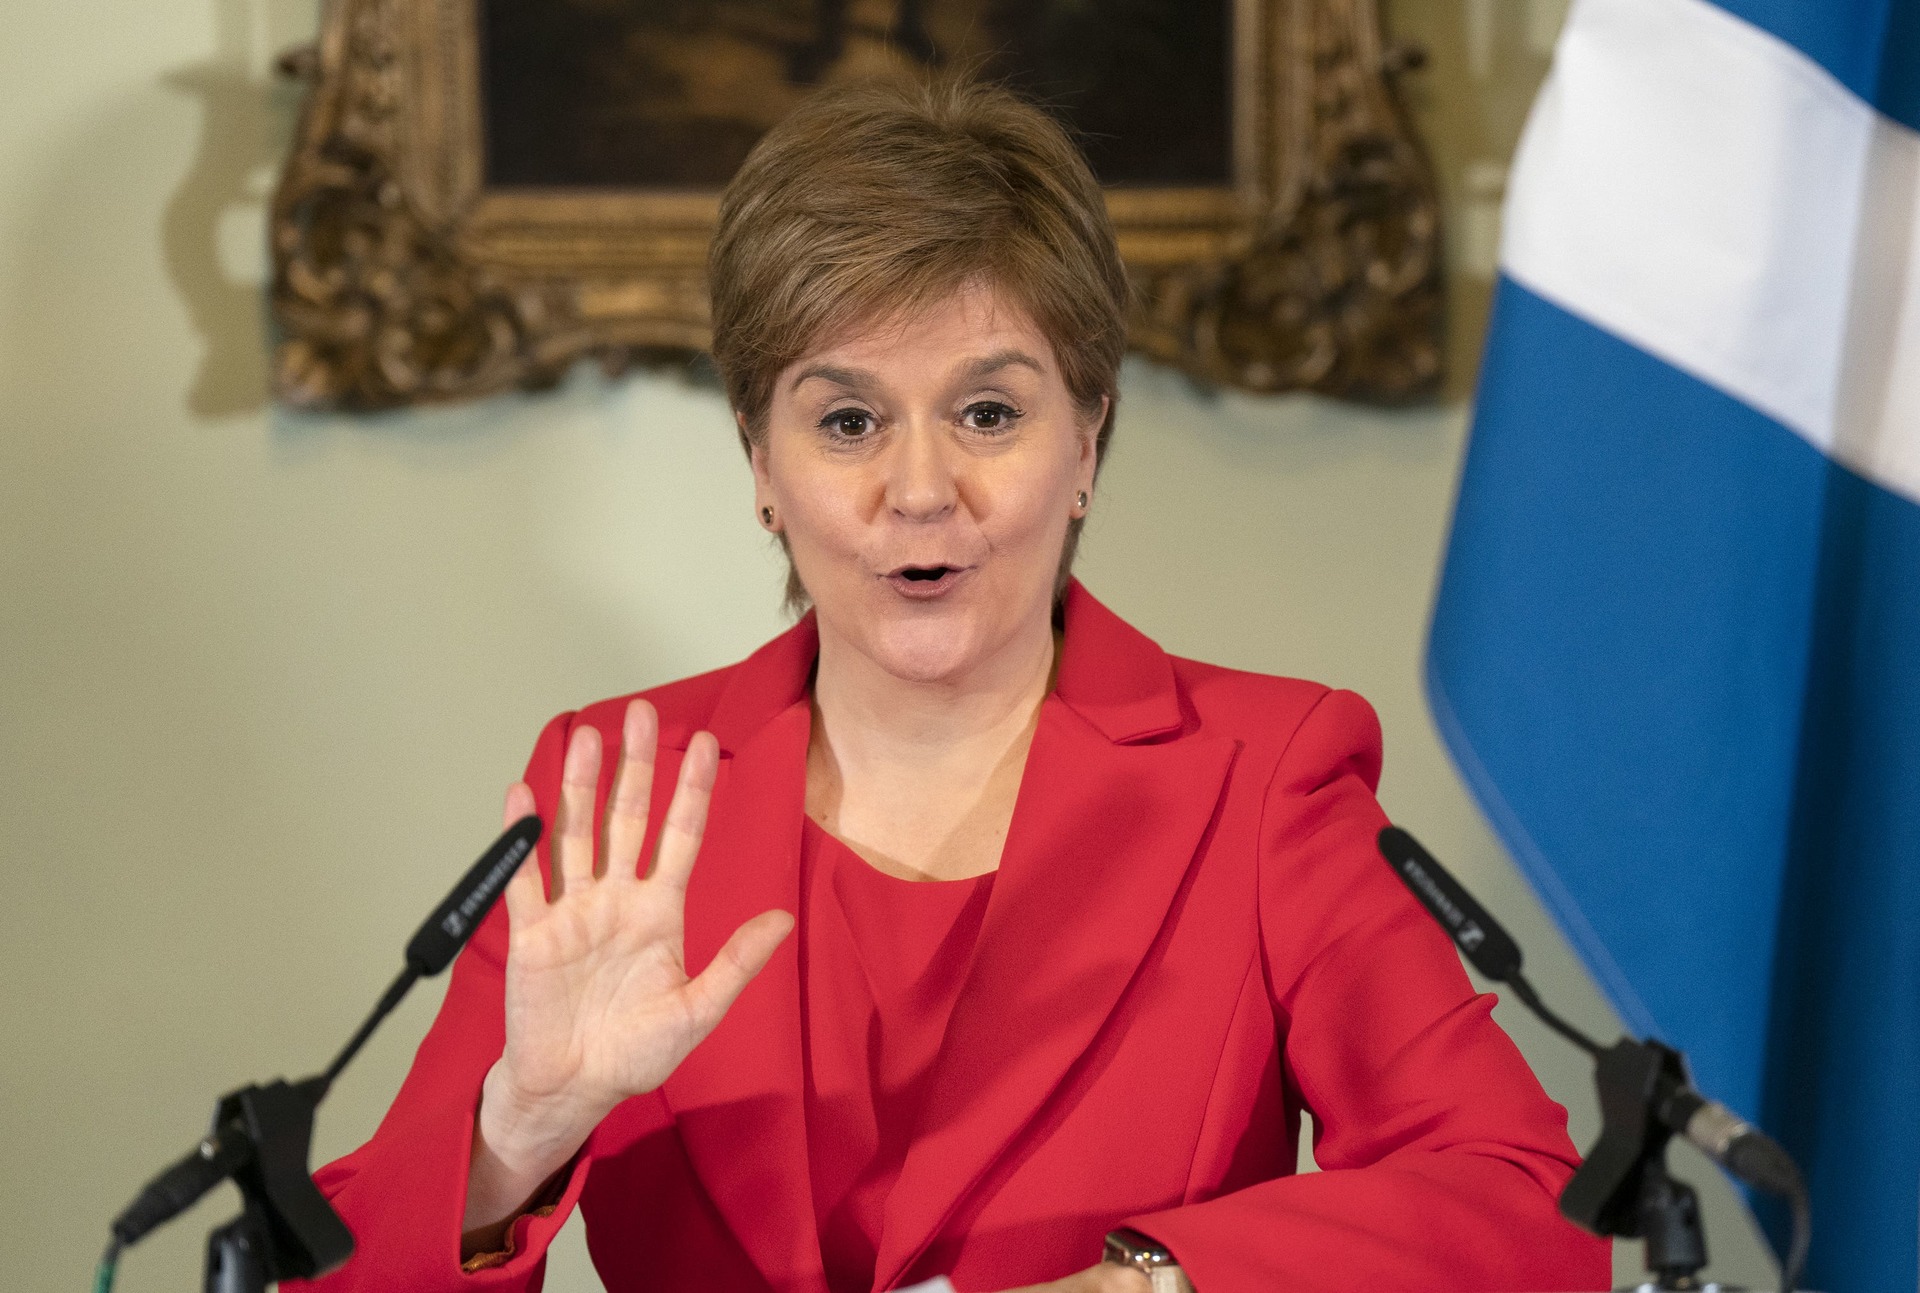 Nicola Sturgeon announced on Wednesday her plans to stand down.